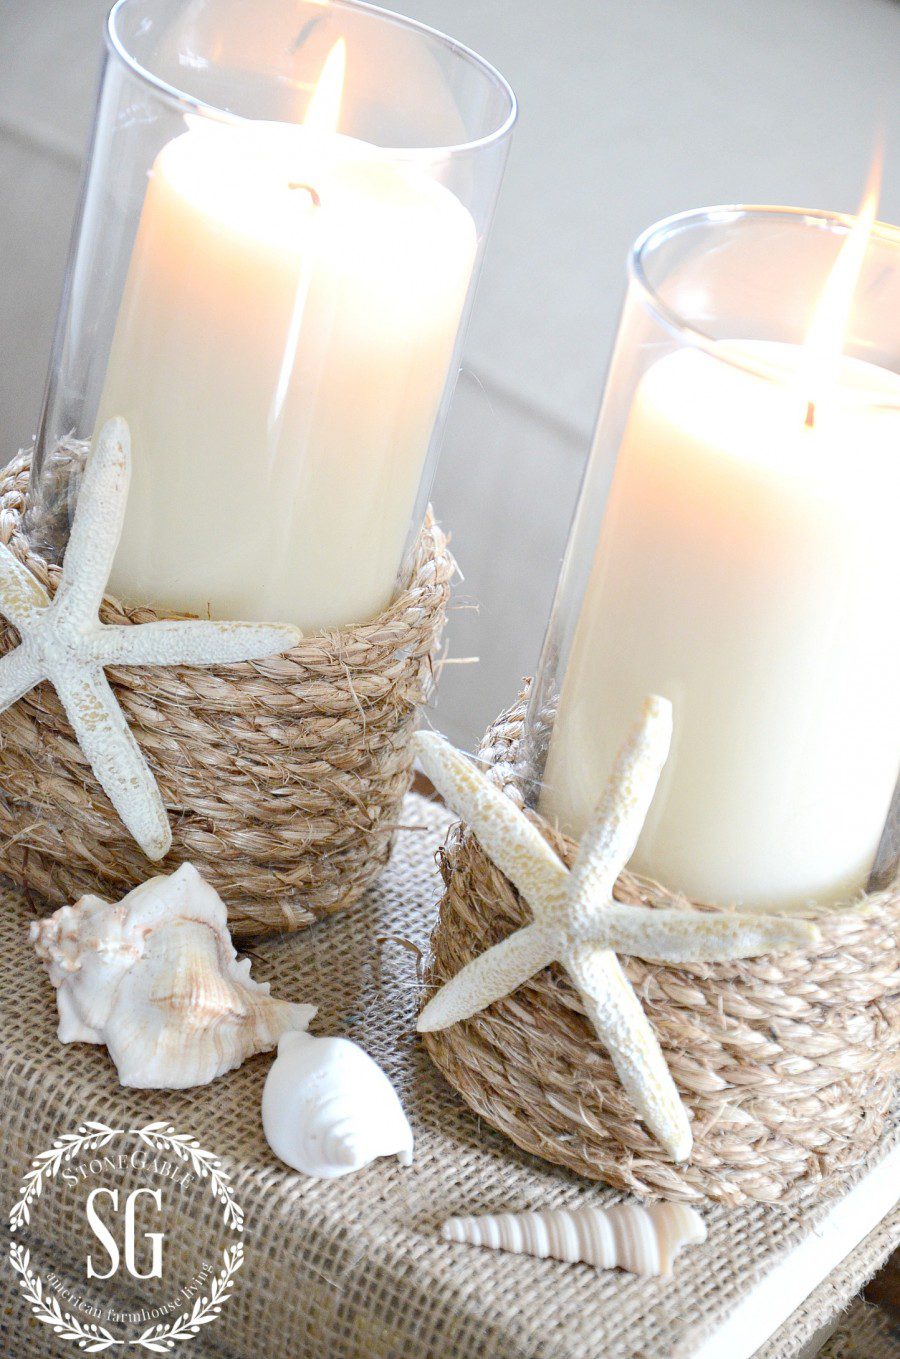  Candles Add a Relaxing and Coastal Feel